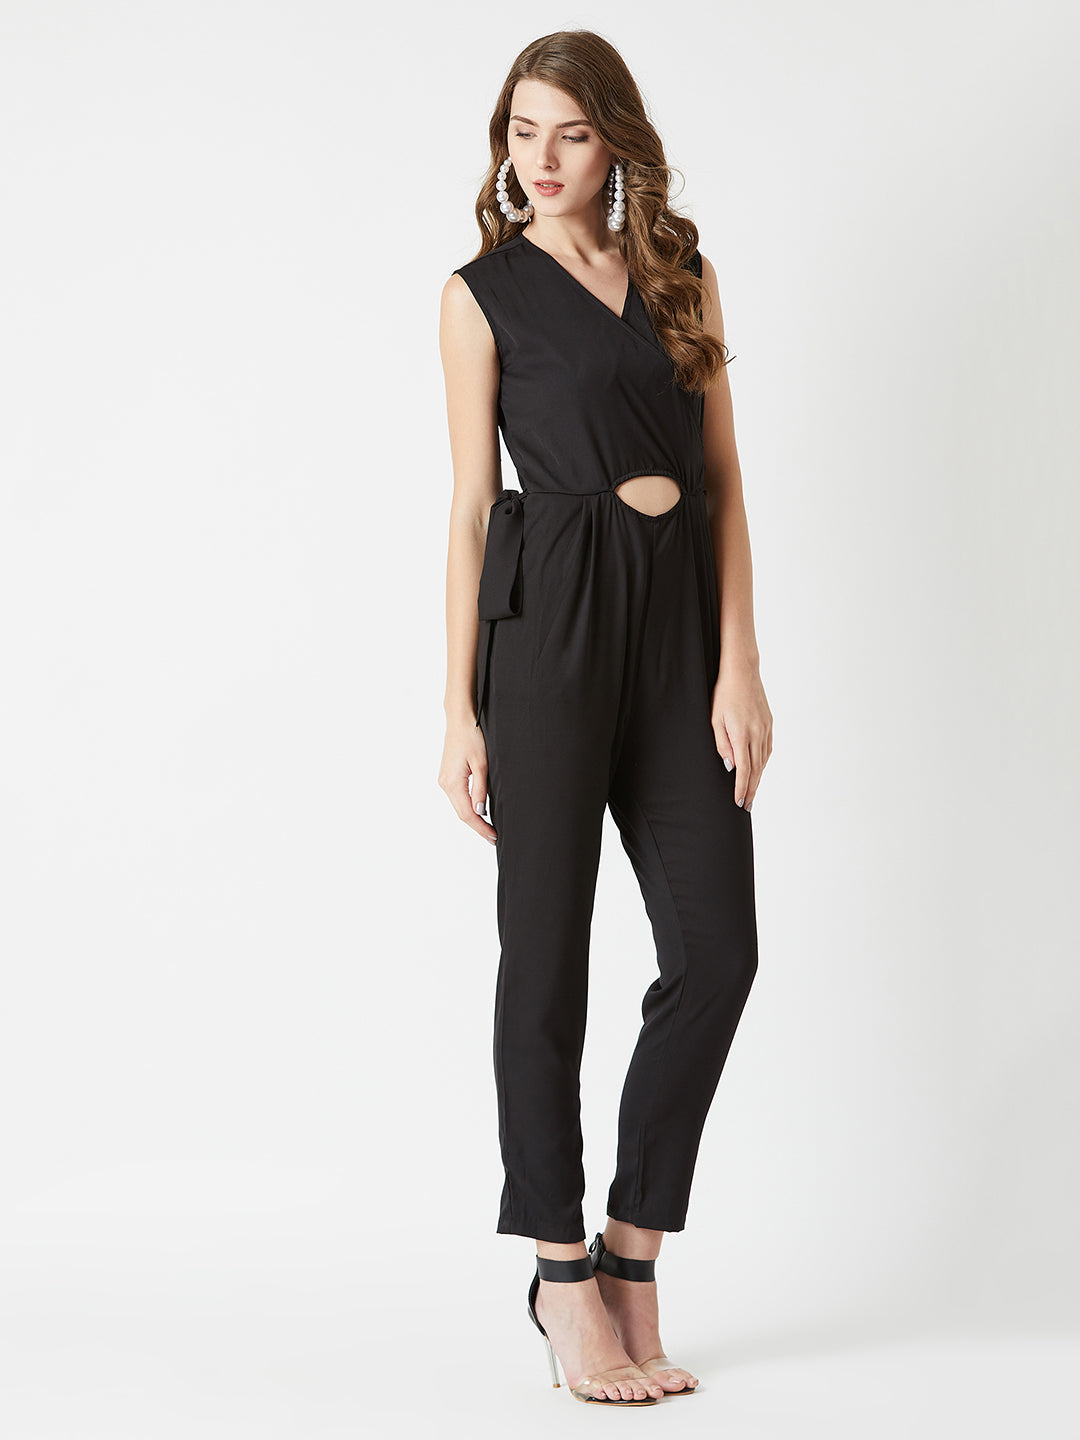 Women's Black V-Neck Sleeveless Solid Belted Cut-out Tie-Up Wrap Jumpsuit